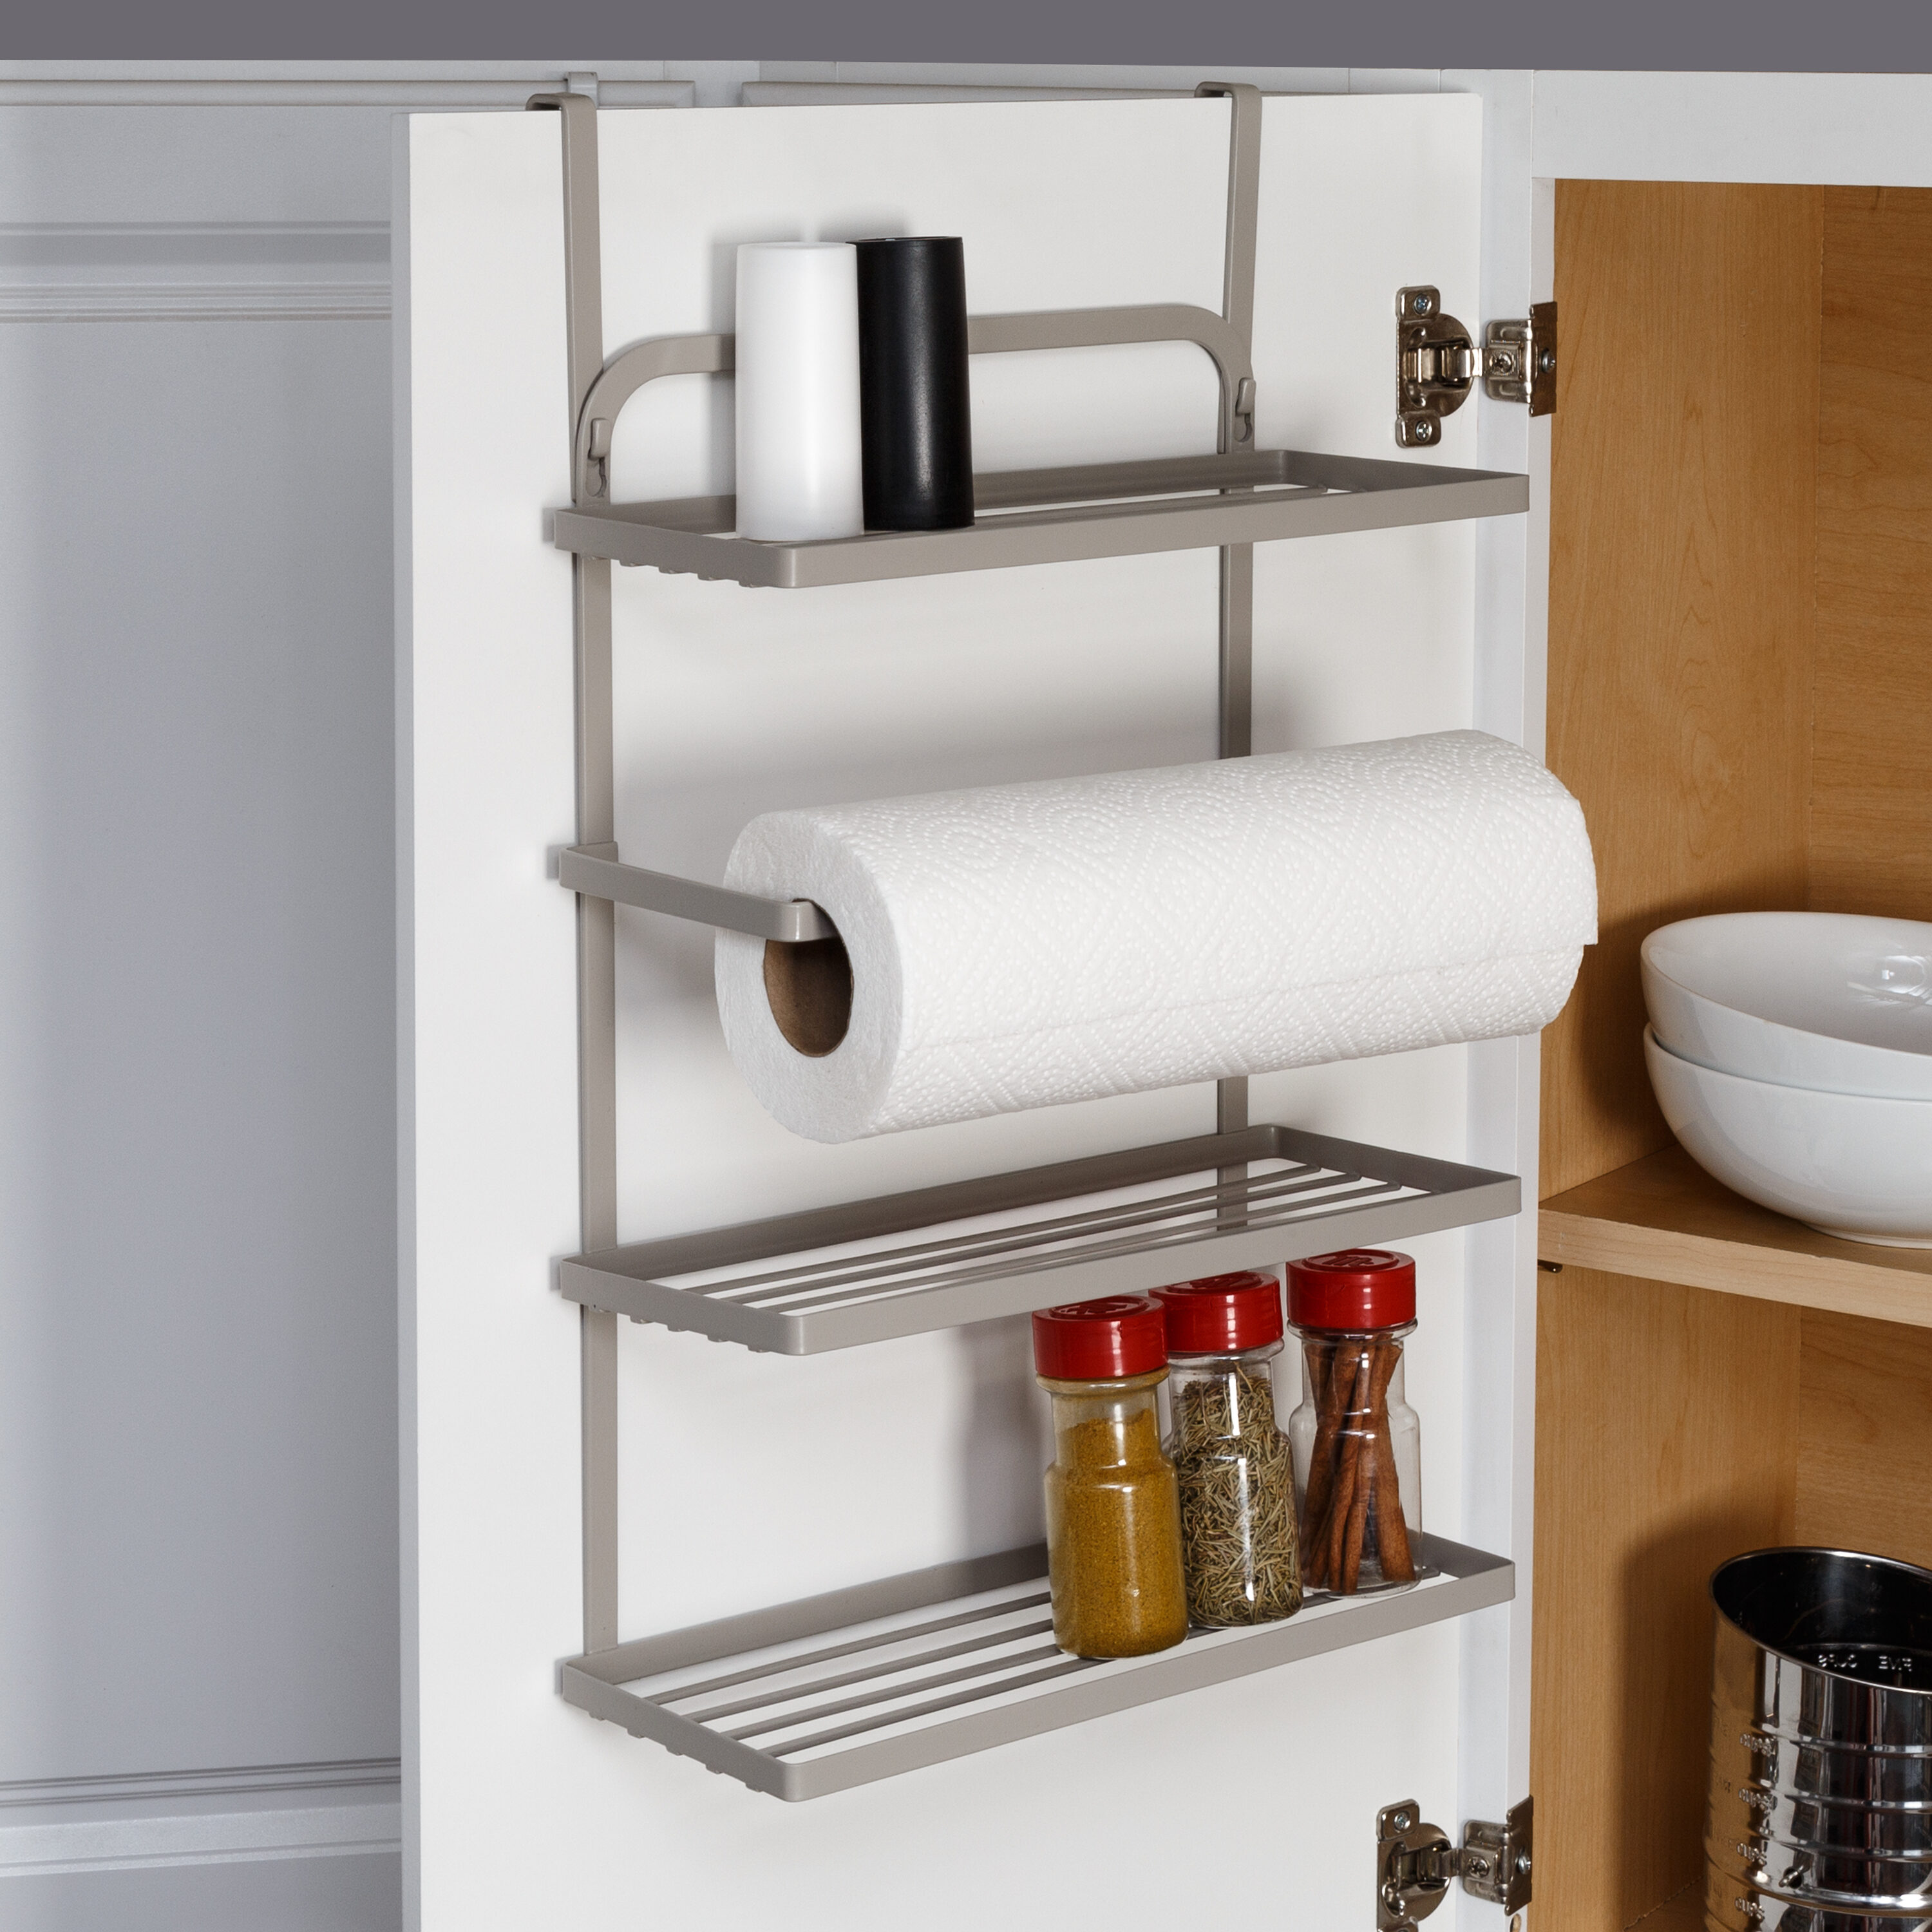 Honey-Can-Do Countertop Stainless Steel Paper Towel Holder KCH